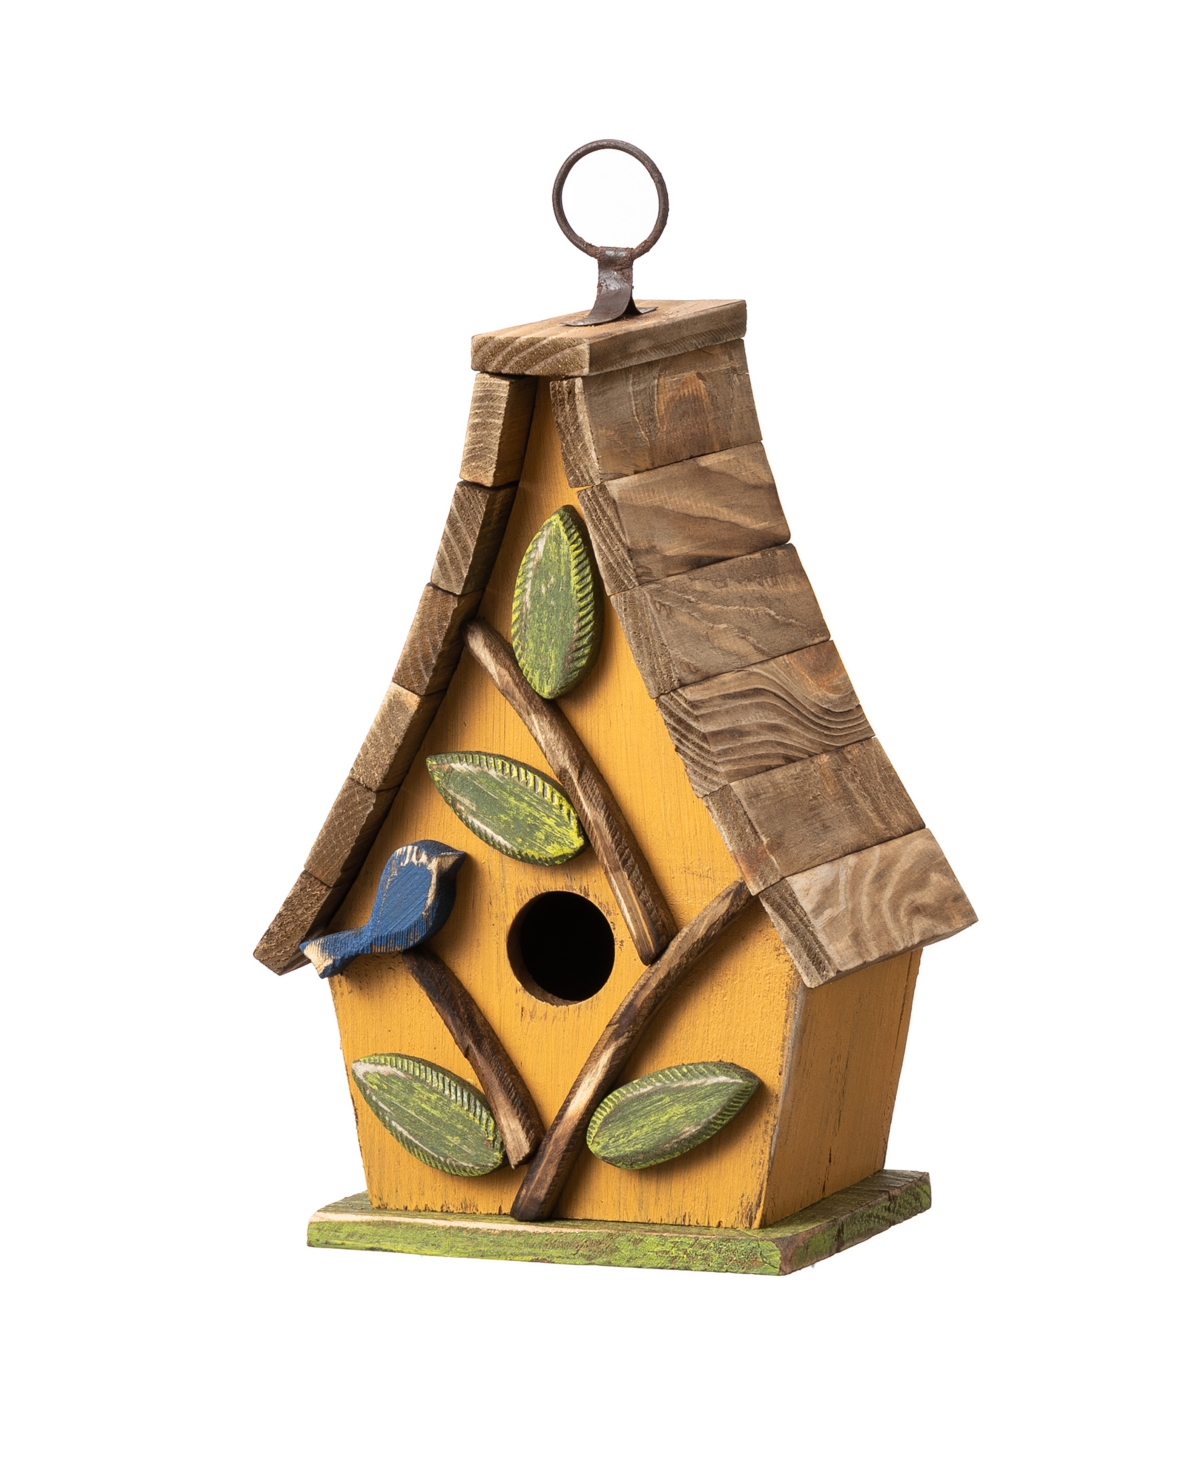 9.5" H Washed Yellow Distressed Solid Wood Decorative Outdoor Garden Birdhouse with Natural Wood Pallet Roof - Multi